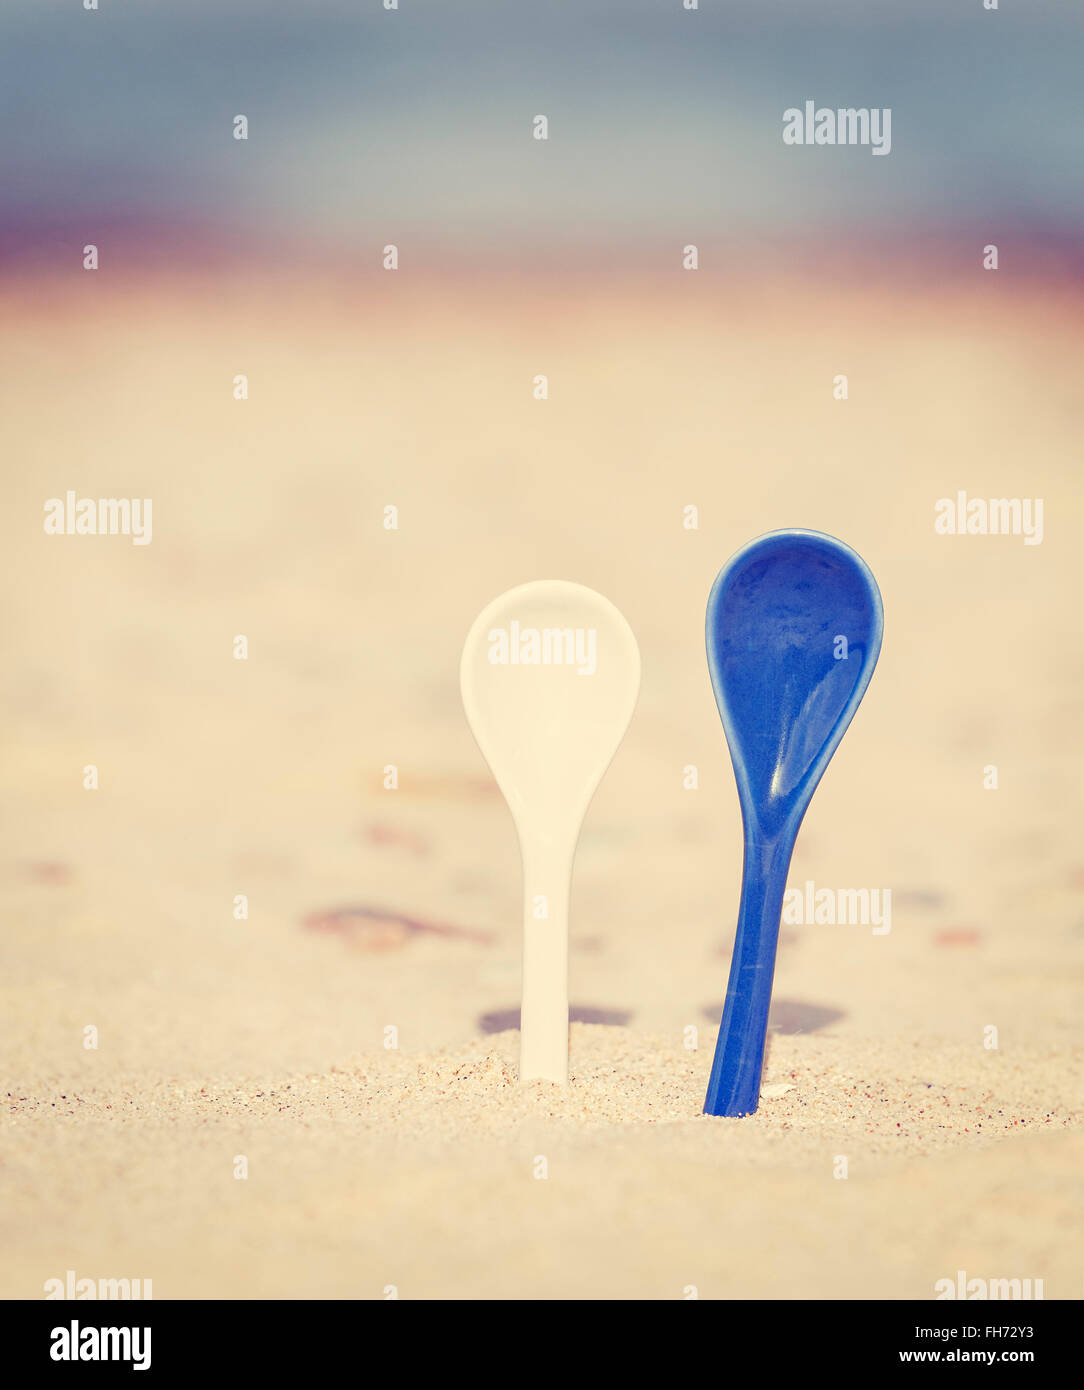 Vintage stylized two porcelain spoons stuck in sand. Stock Photo